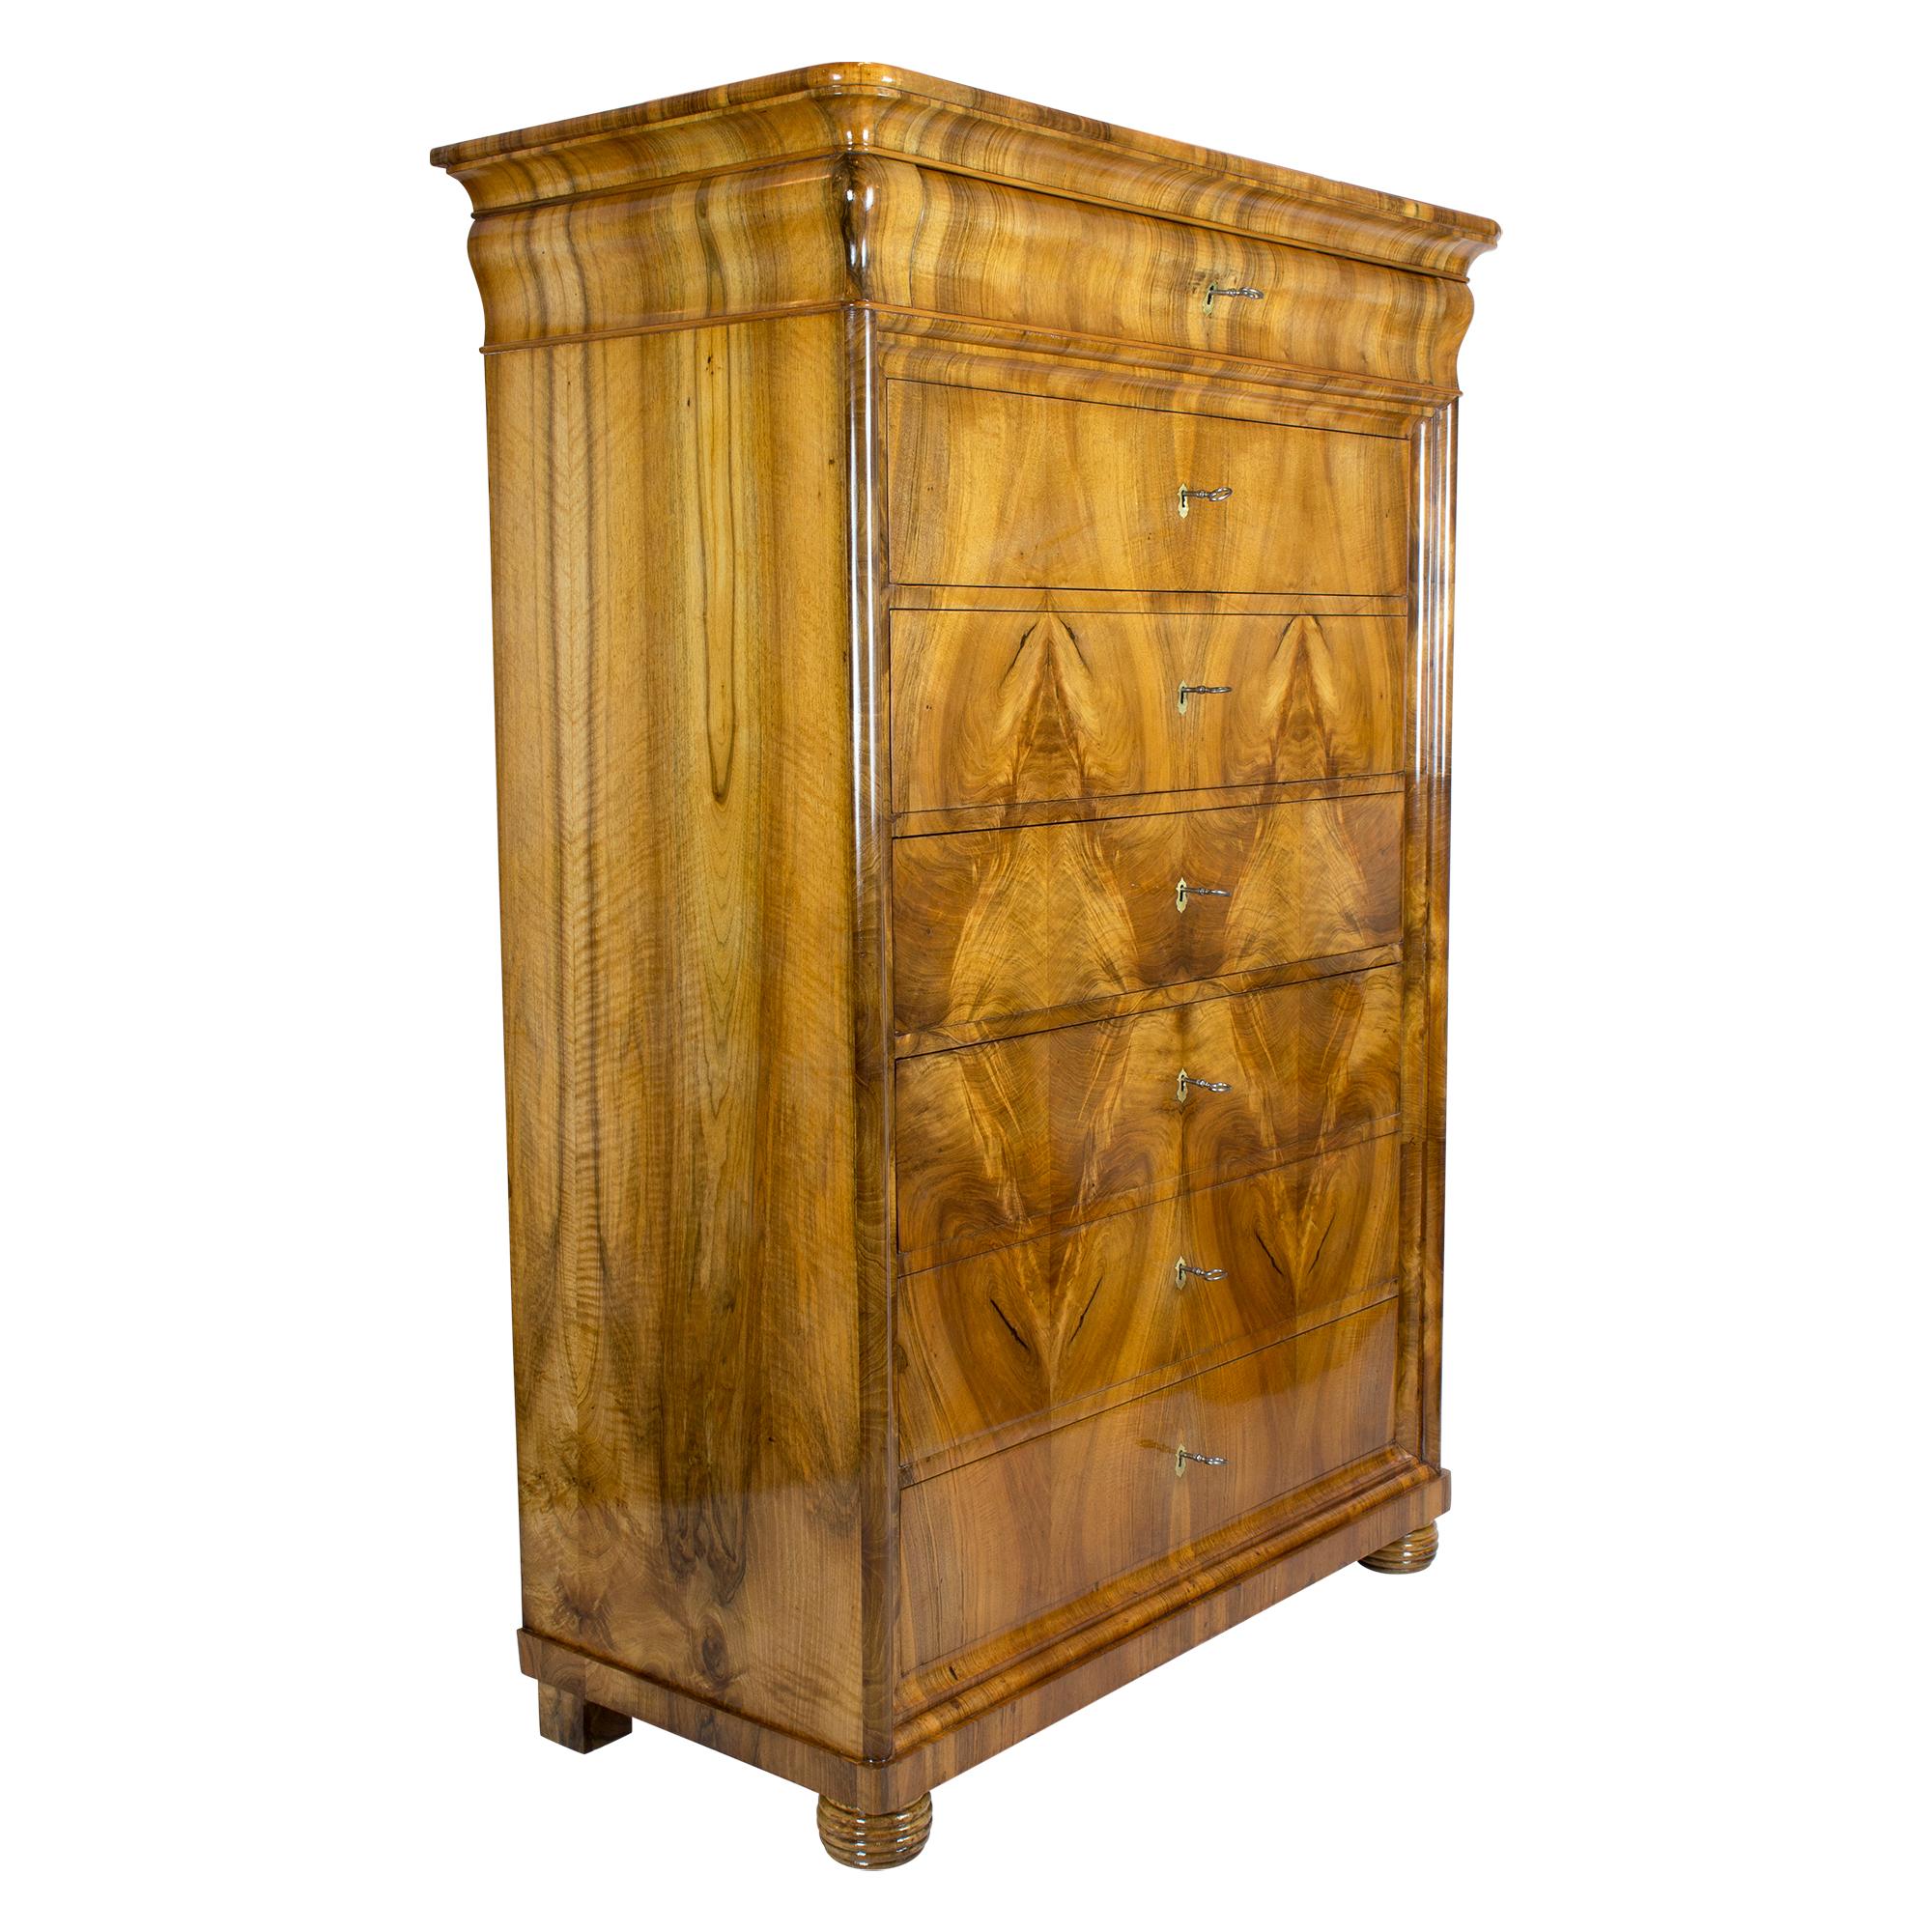 The chiffoniere comes from Southern Germany from the Biedermeier period around 1830. The seven drawers of the high chest can all be closed individually. The chiffoniere has a very beautiful mirrored walnut veneer. The key plates are made of brass